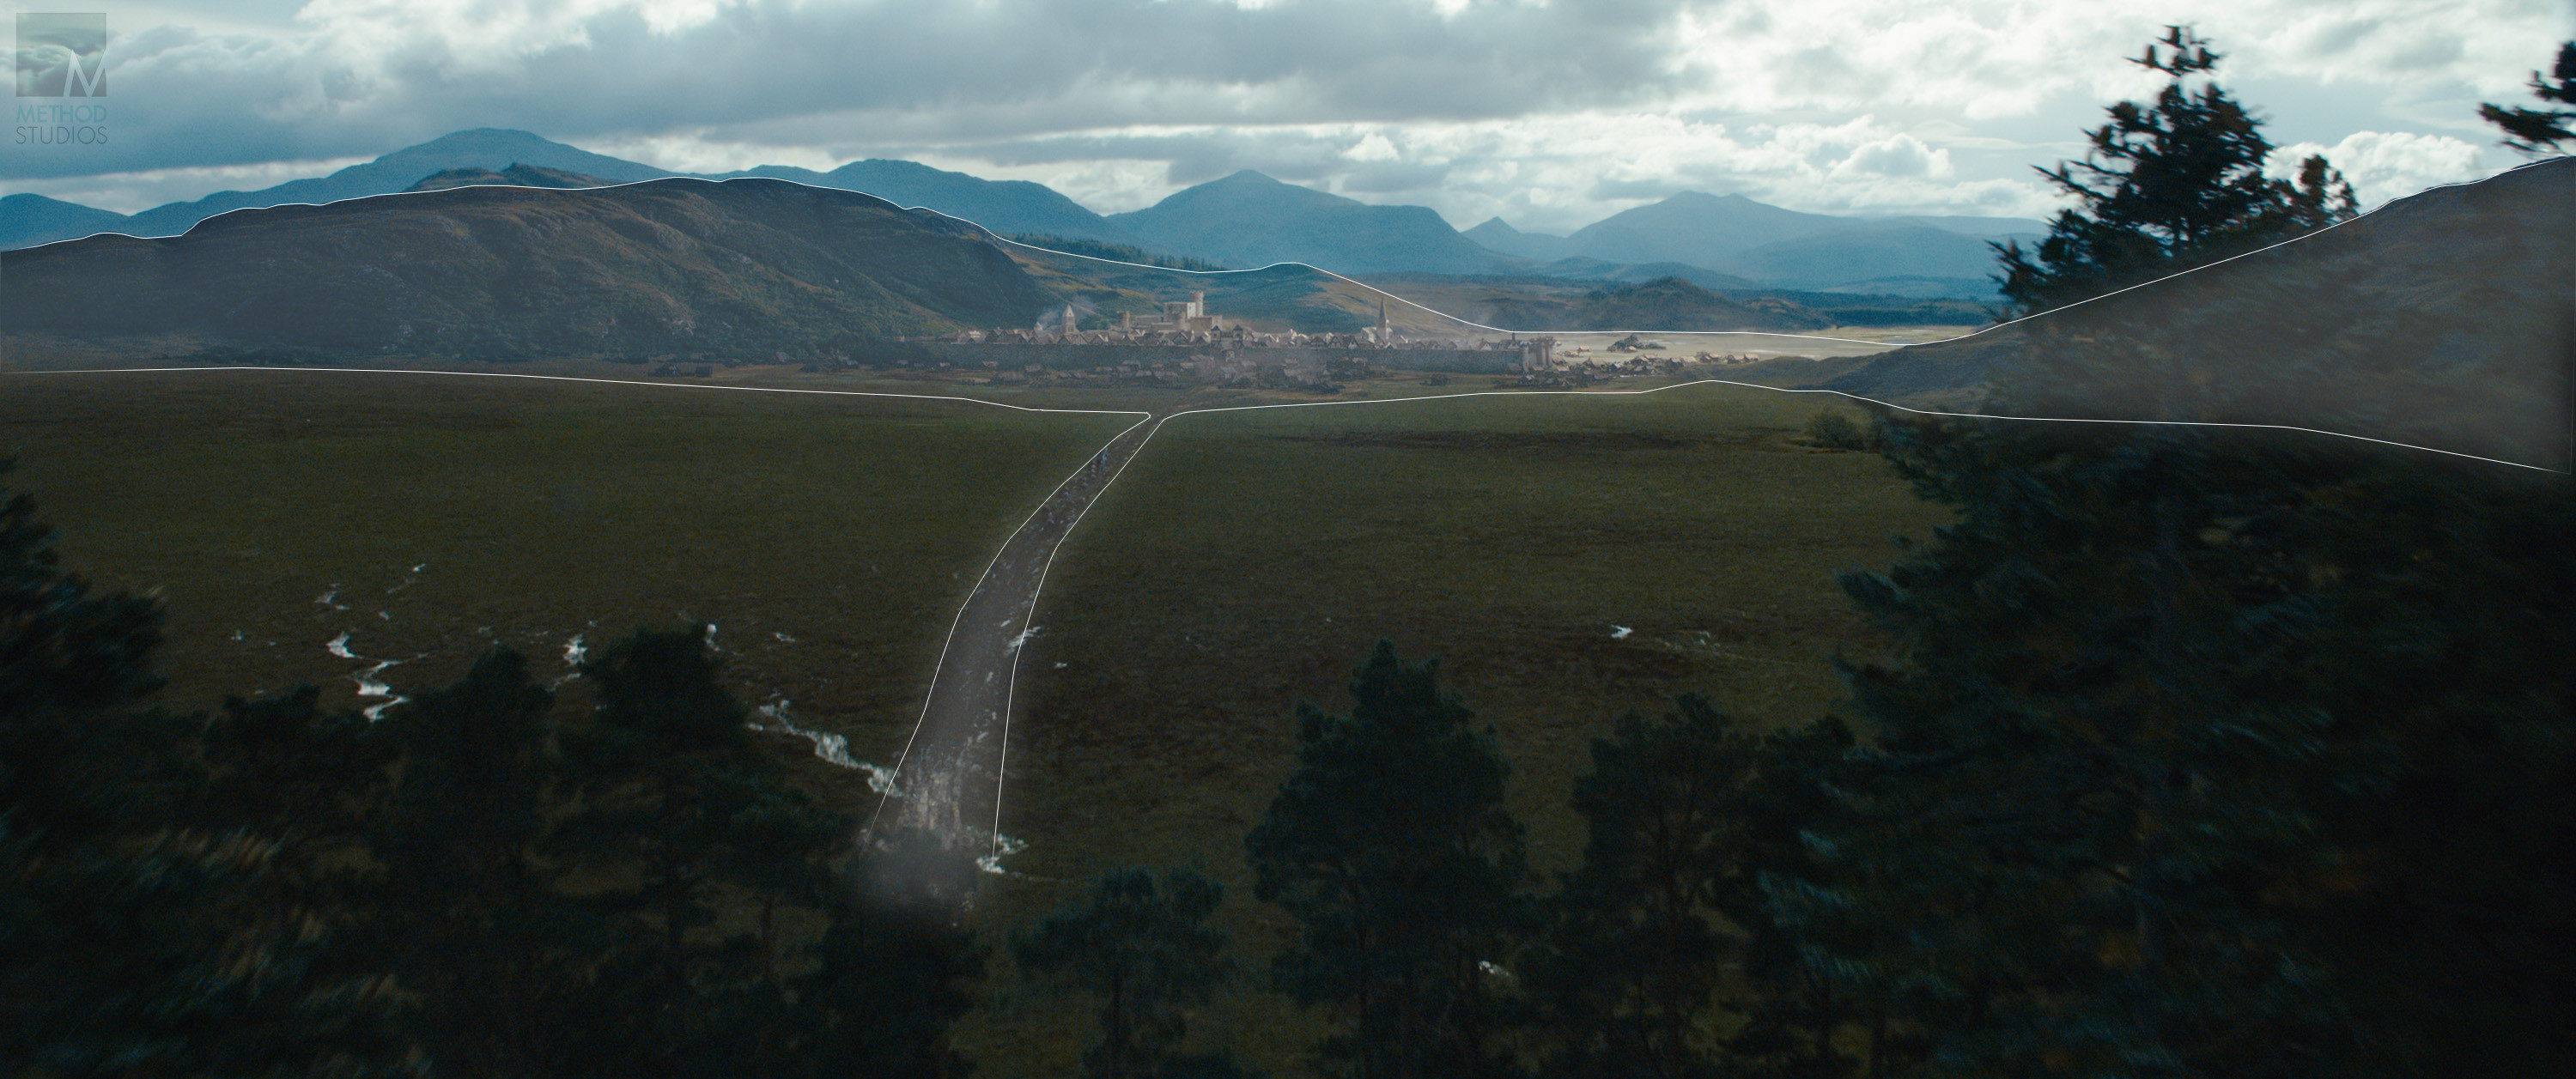 Areas edited in matte painting stage